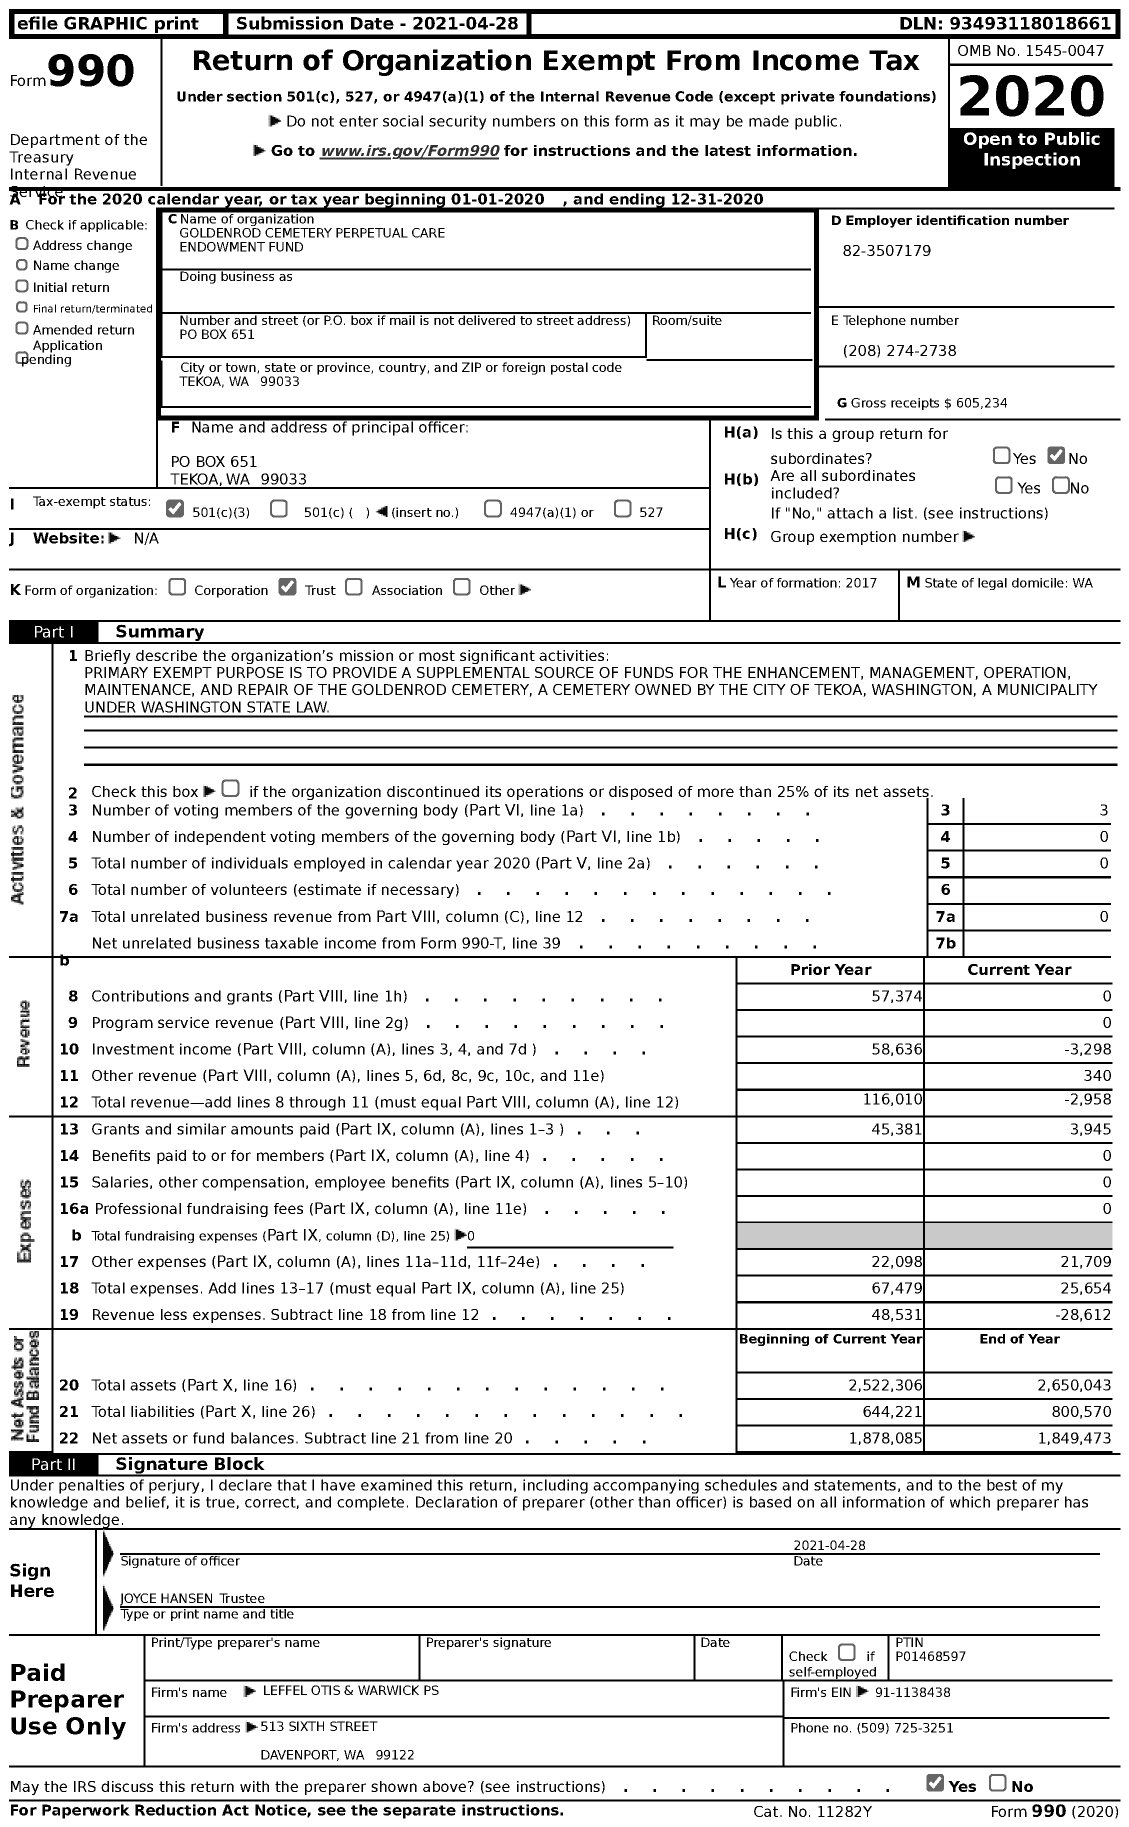 Image of first page of 2020 Form 990 for Goldenrod Cemetery Perpetual Care Endowment Fund